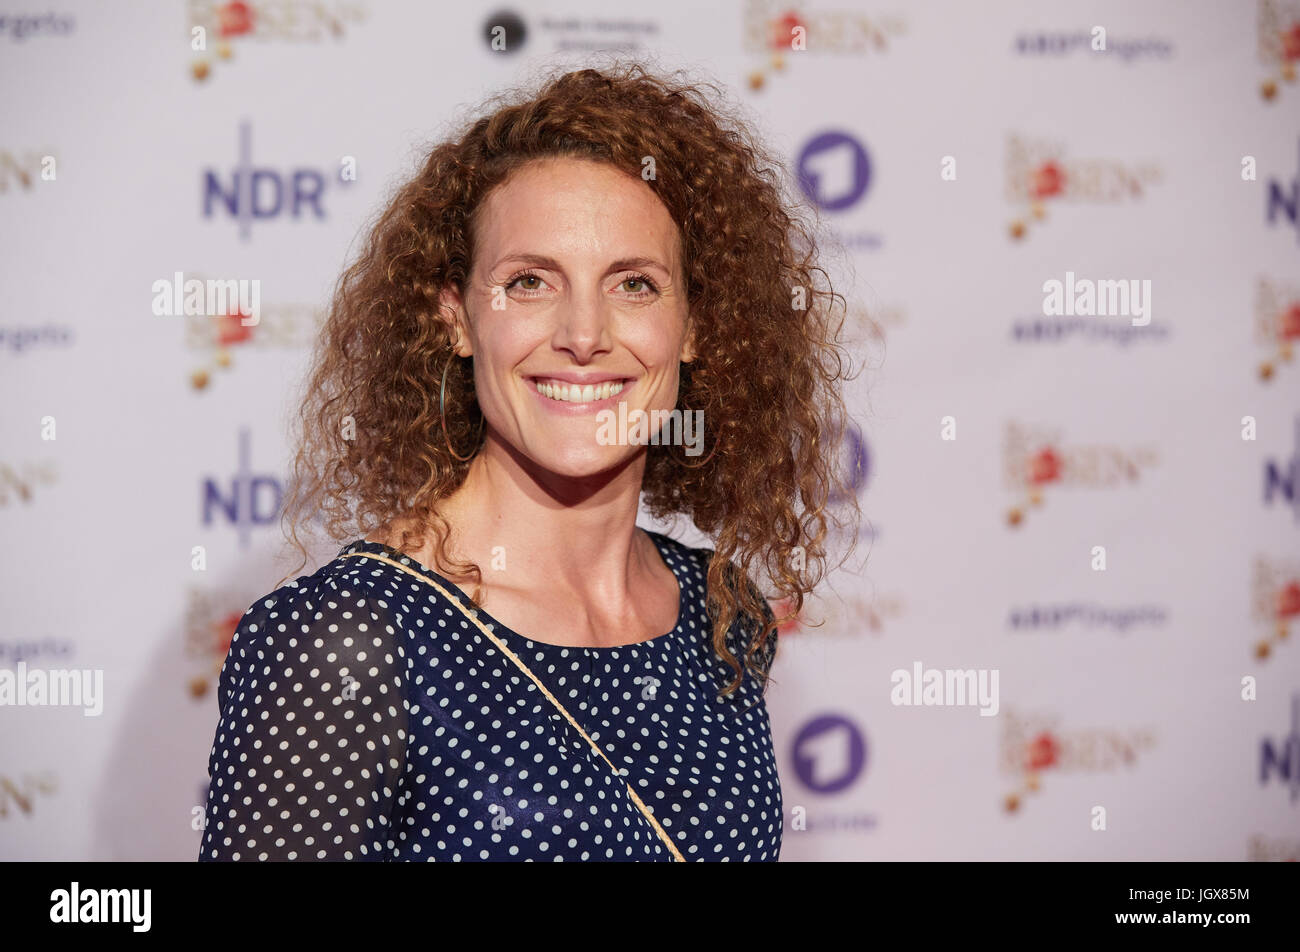 Austrian actress Barbara Lanz arrives for an event celebrating '2500 Folgen Rote Rosen' (lit 2500 episodes of Rote Rosen) in Lueneburg, Germany, 1 July 2017. Photo: Georg Wendt/dpa Stock Photo